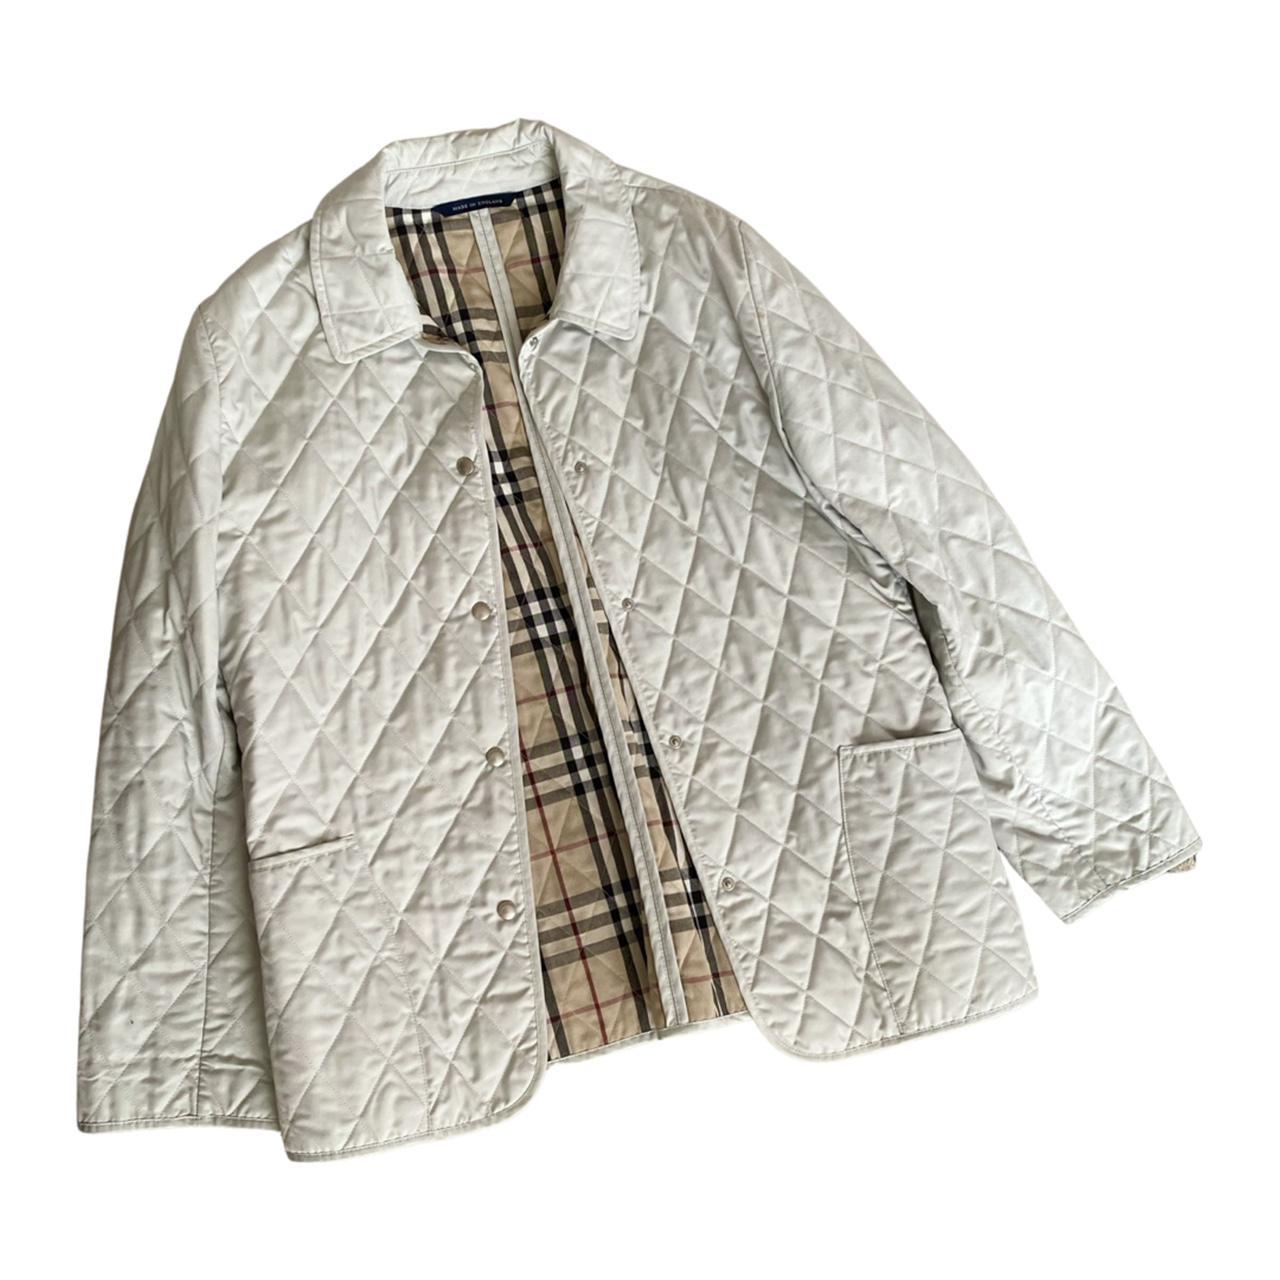 Burberry Women's Green and White Jacket